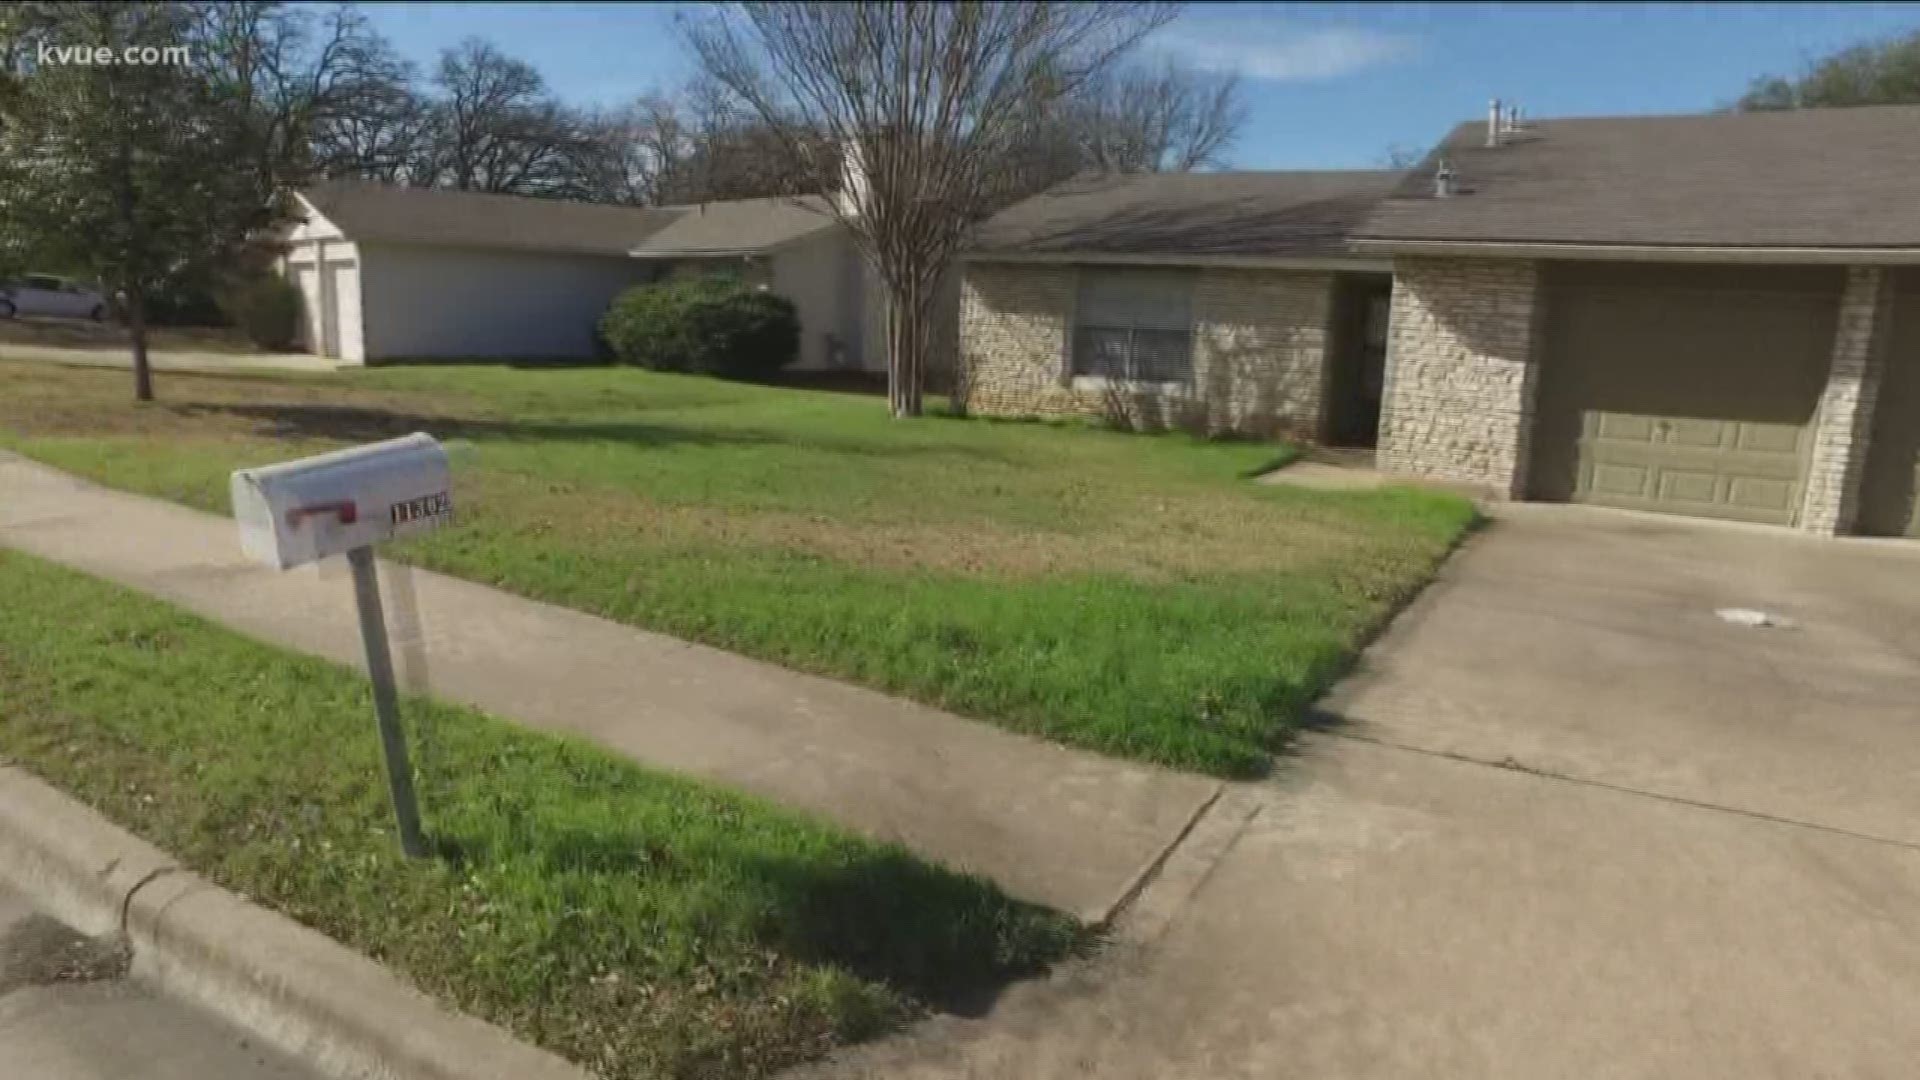 Property owners in Bastrop Bounty owe almost $2 million in taxes.